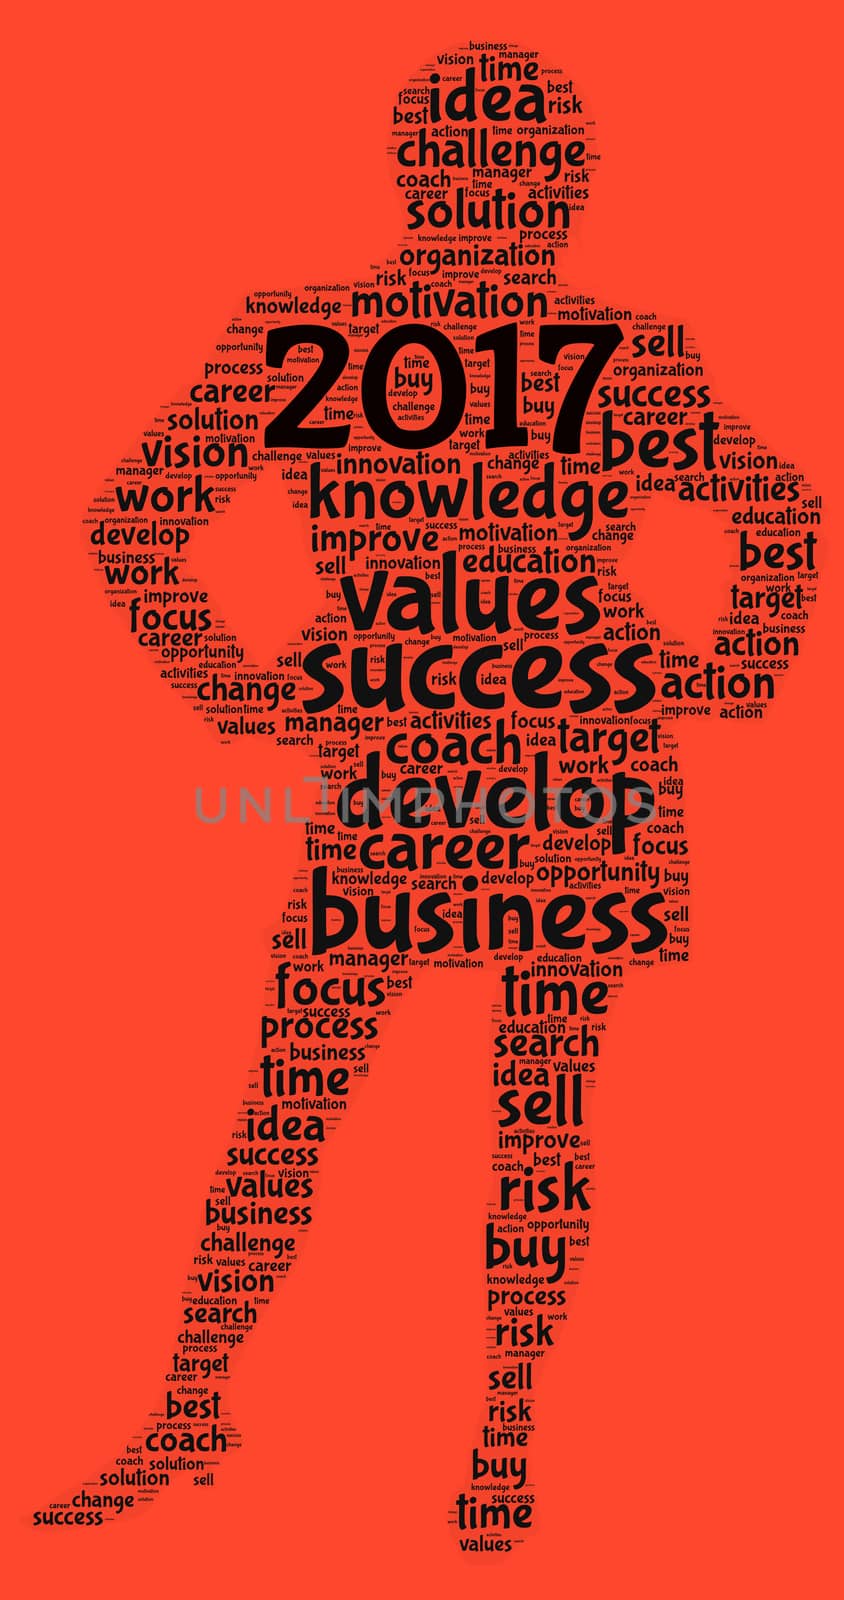 Business 2017 word cloud concept in shape business woman